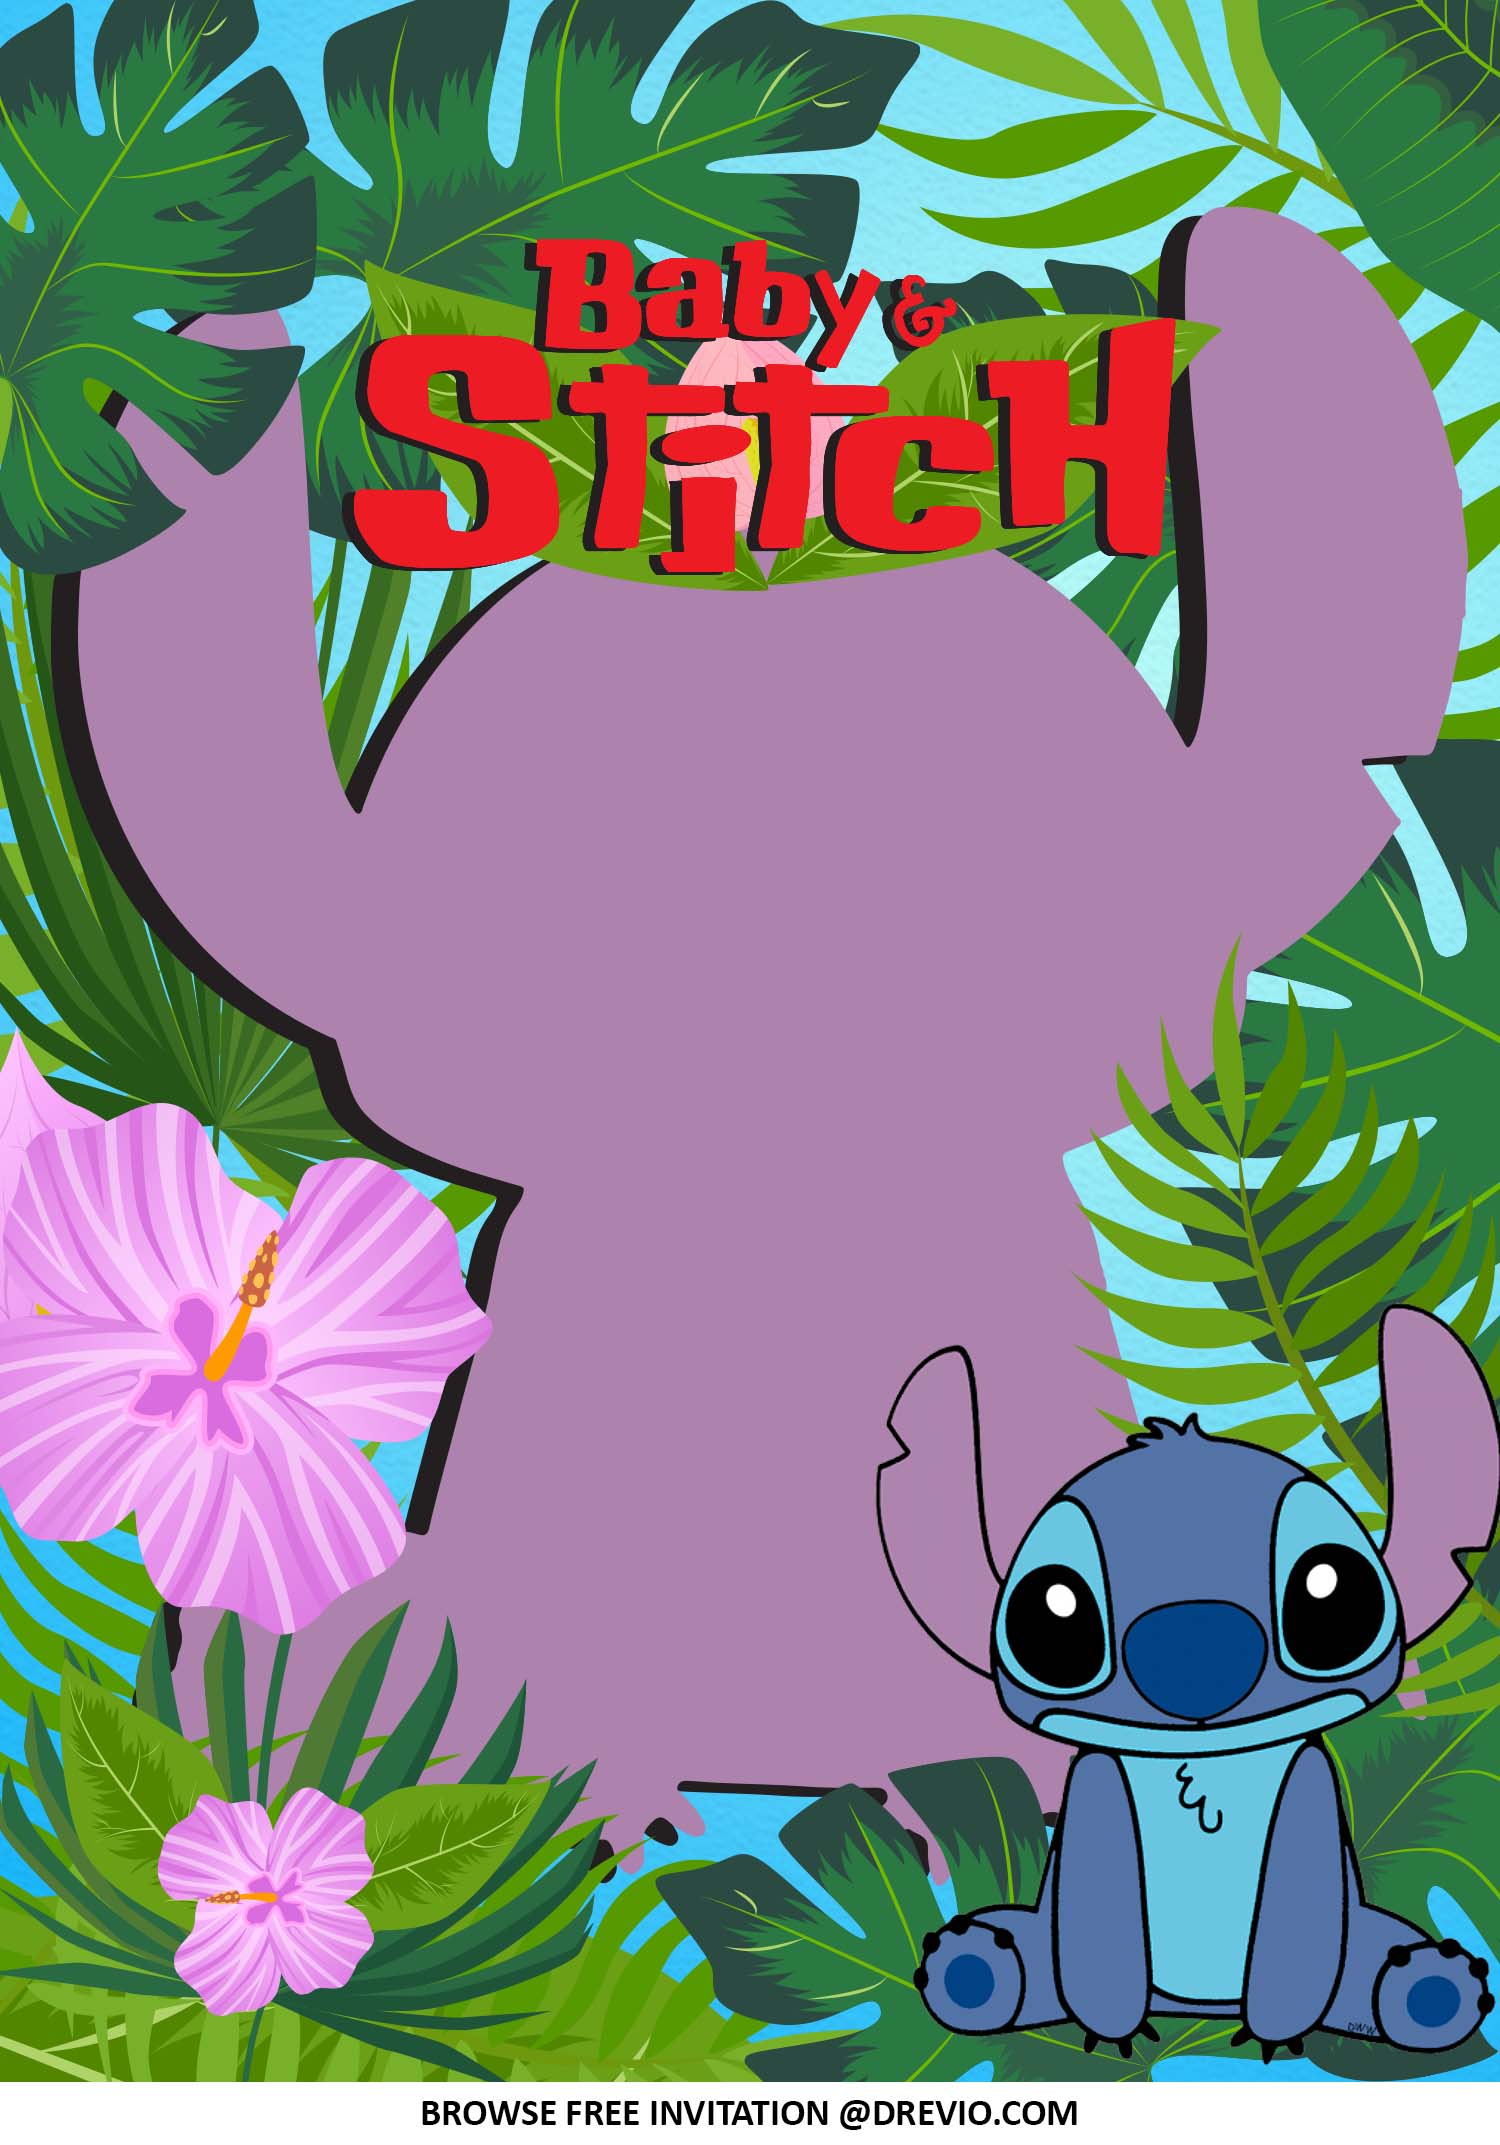 Lilo and Stitch Party Invitation Template - Instant Download